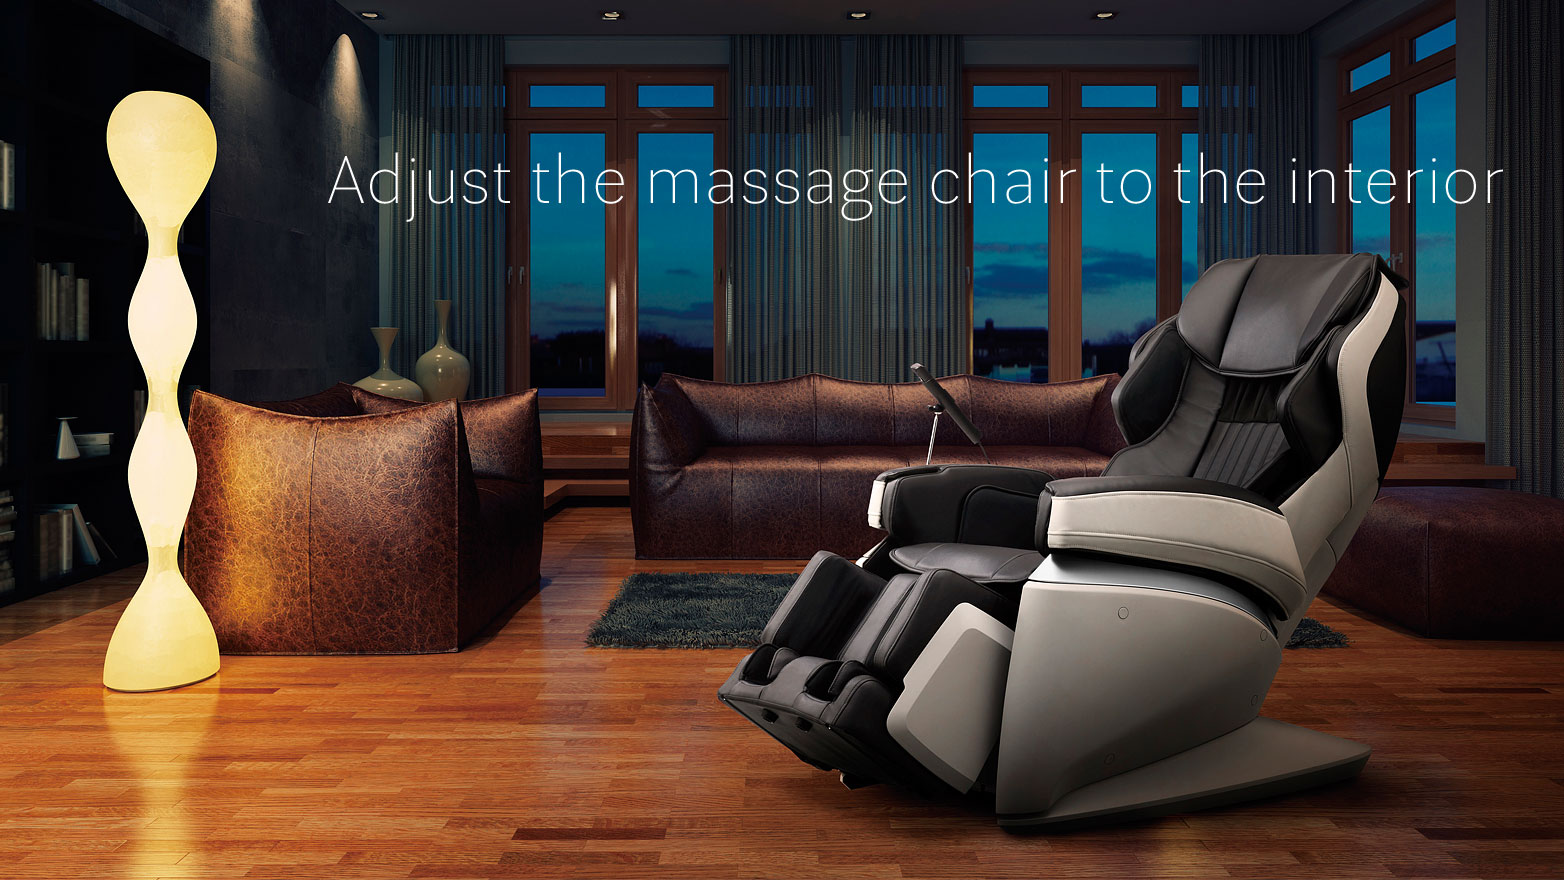 Place for massage chair